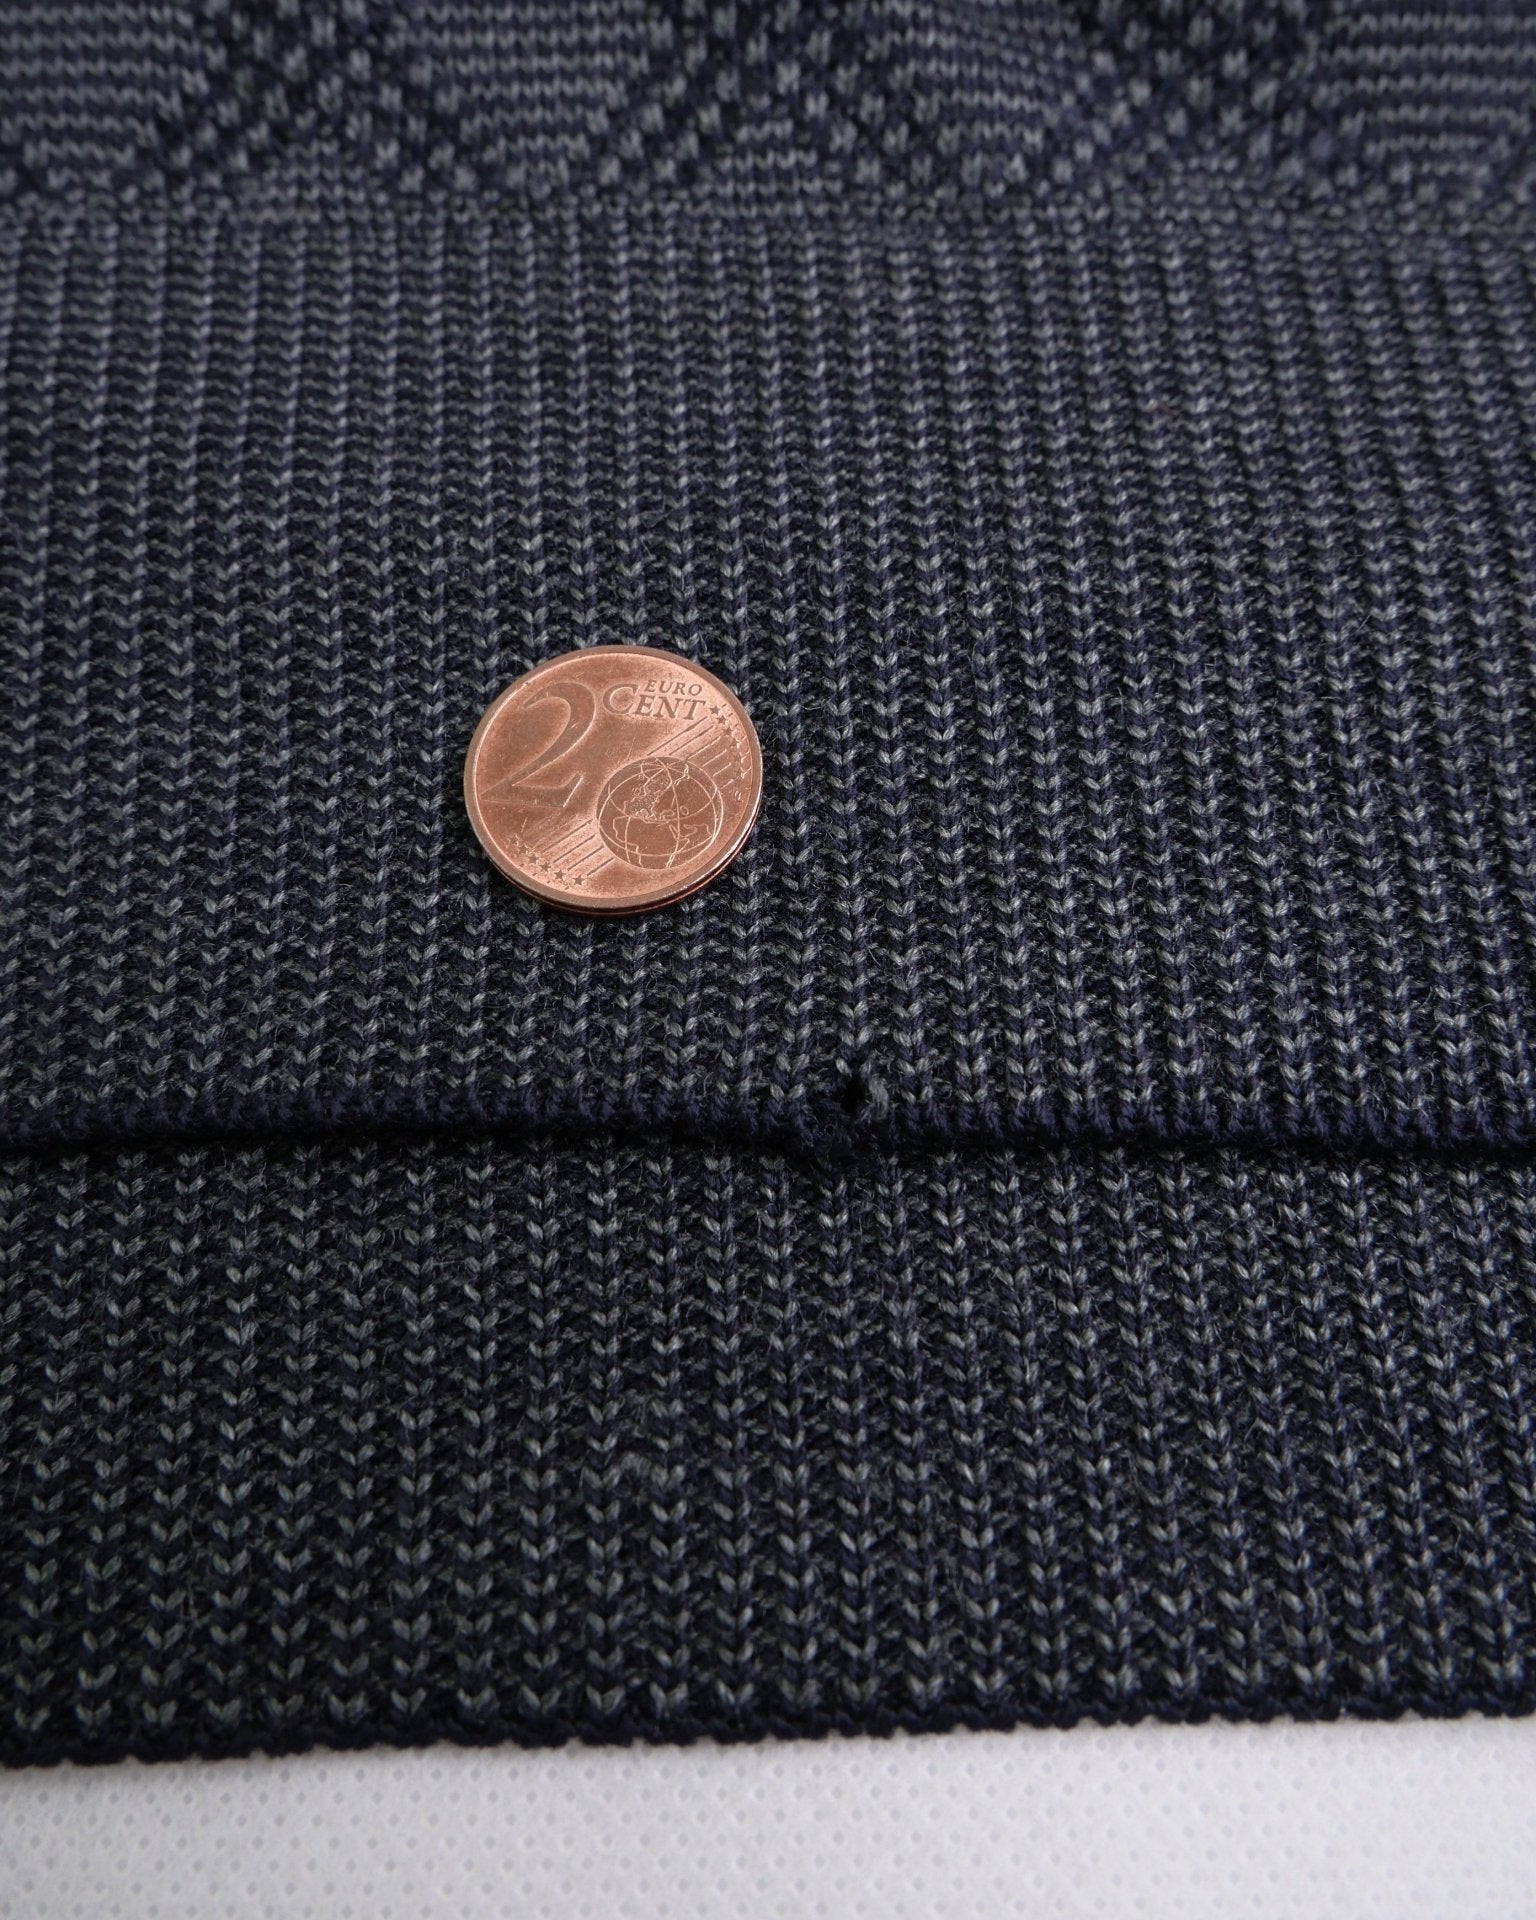 Vintage knitted L/S Polo Shirt - Peeces